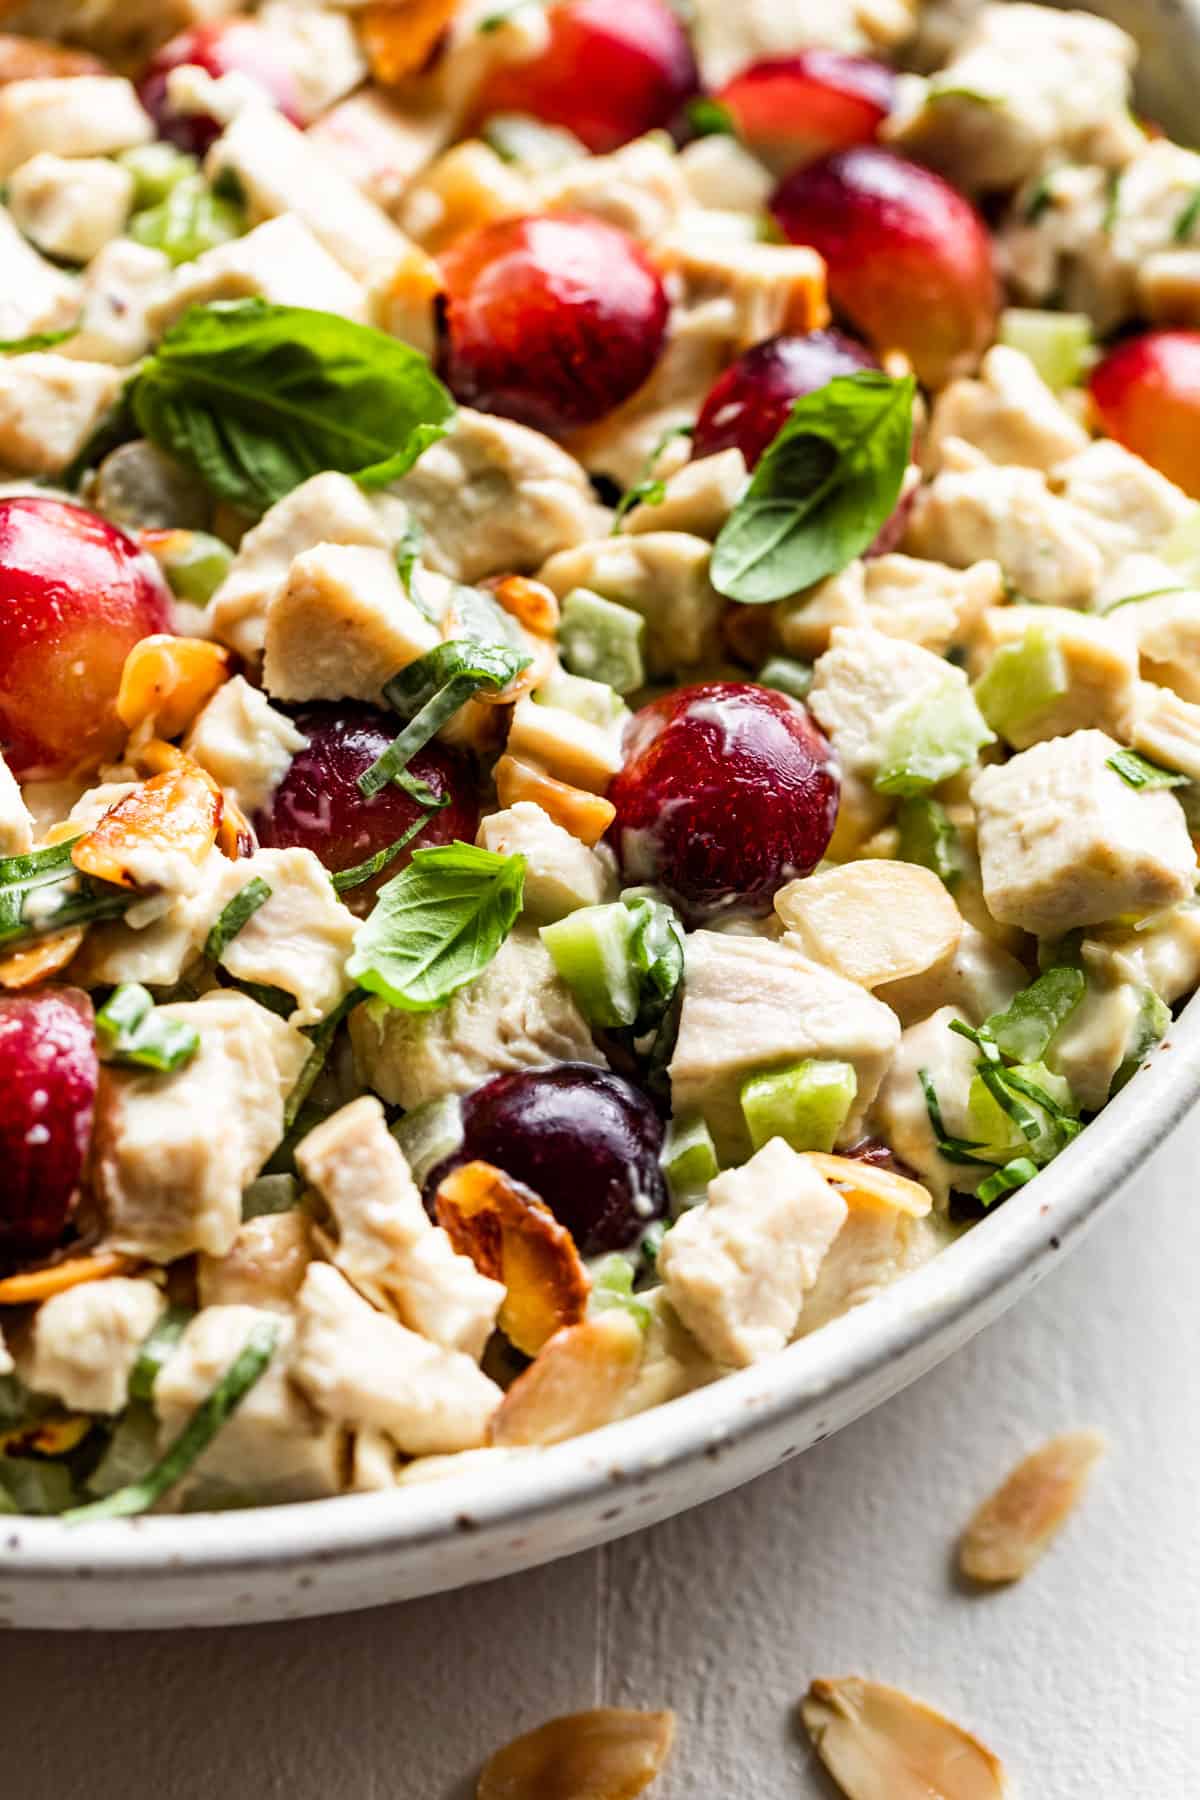 Chicken Salad with halved grapes in a pottery bowl.